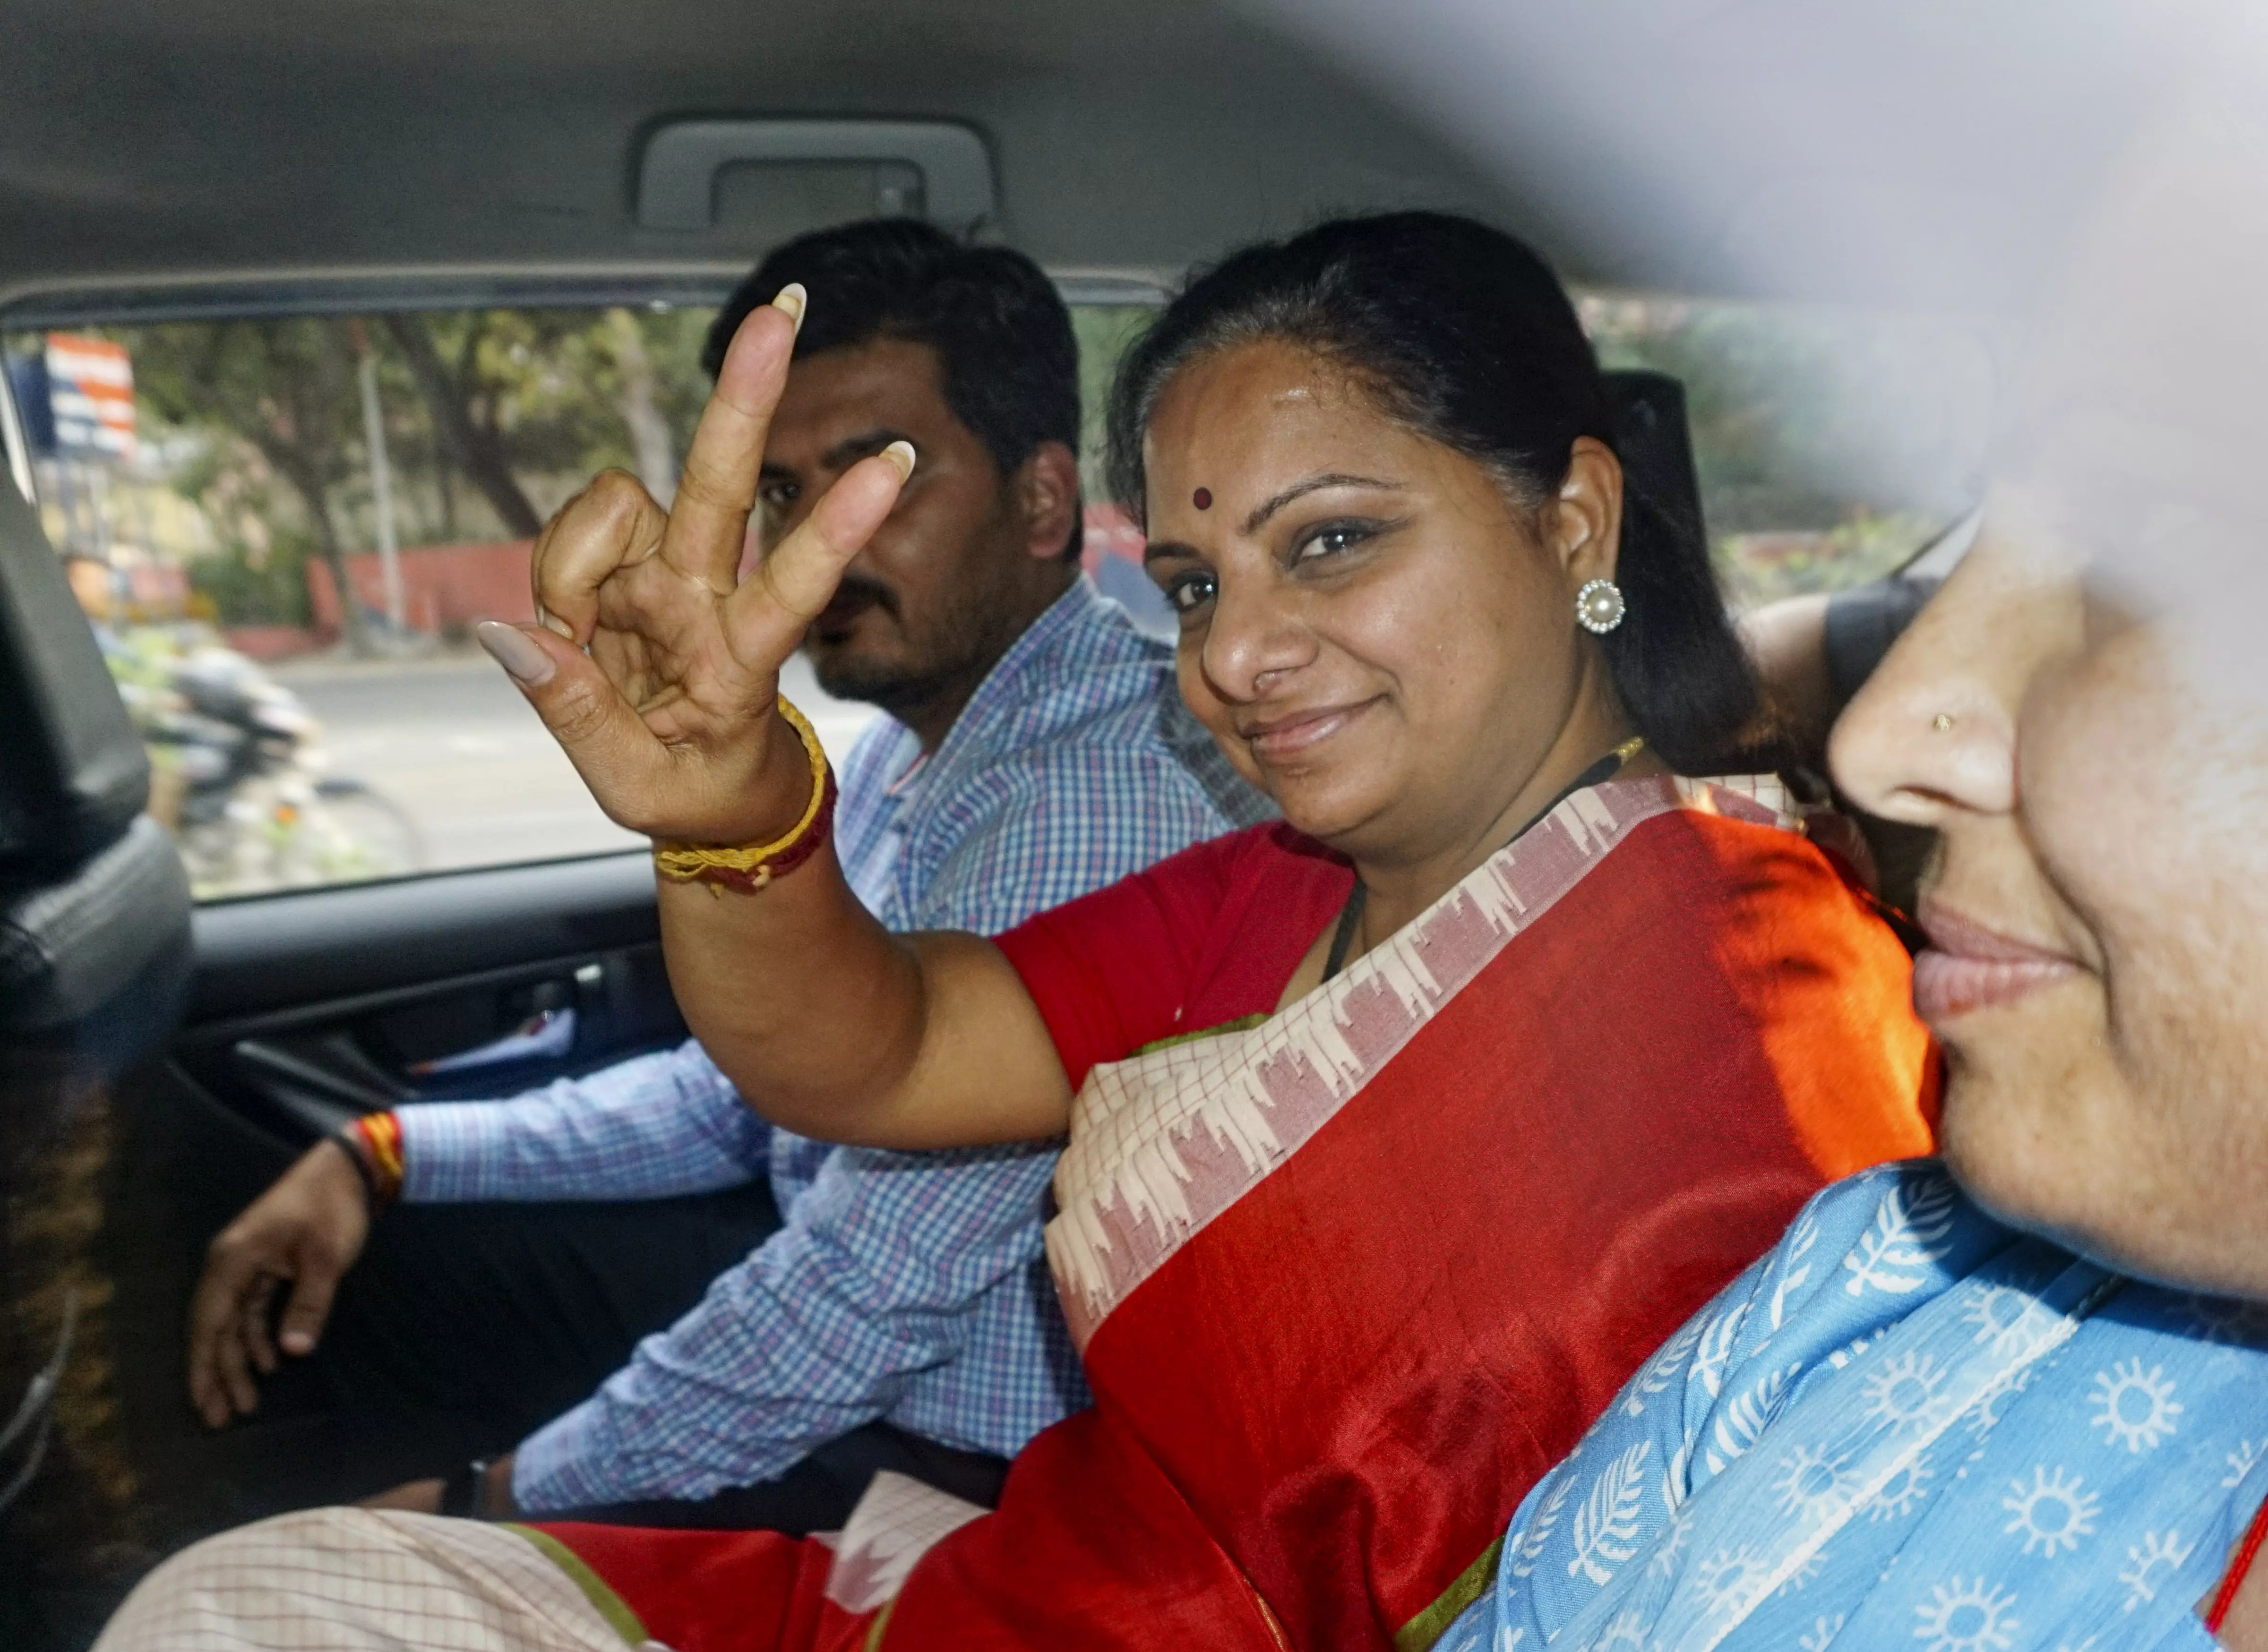 Explained: BRS leader Kavitha’s exact role in Delhi excise policy case